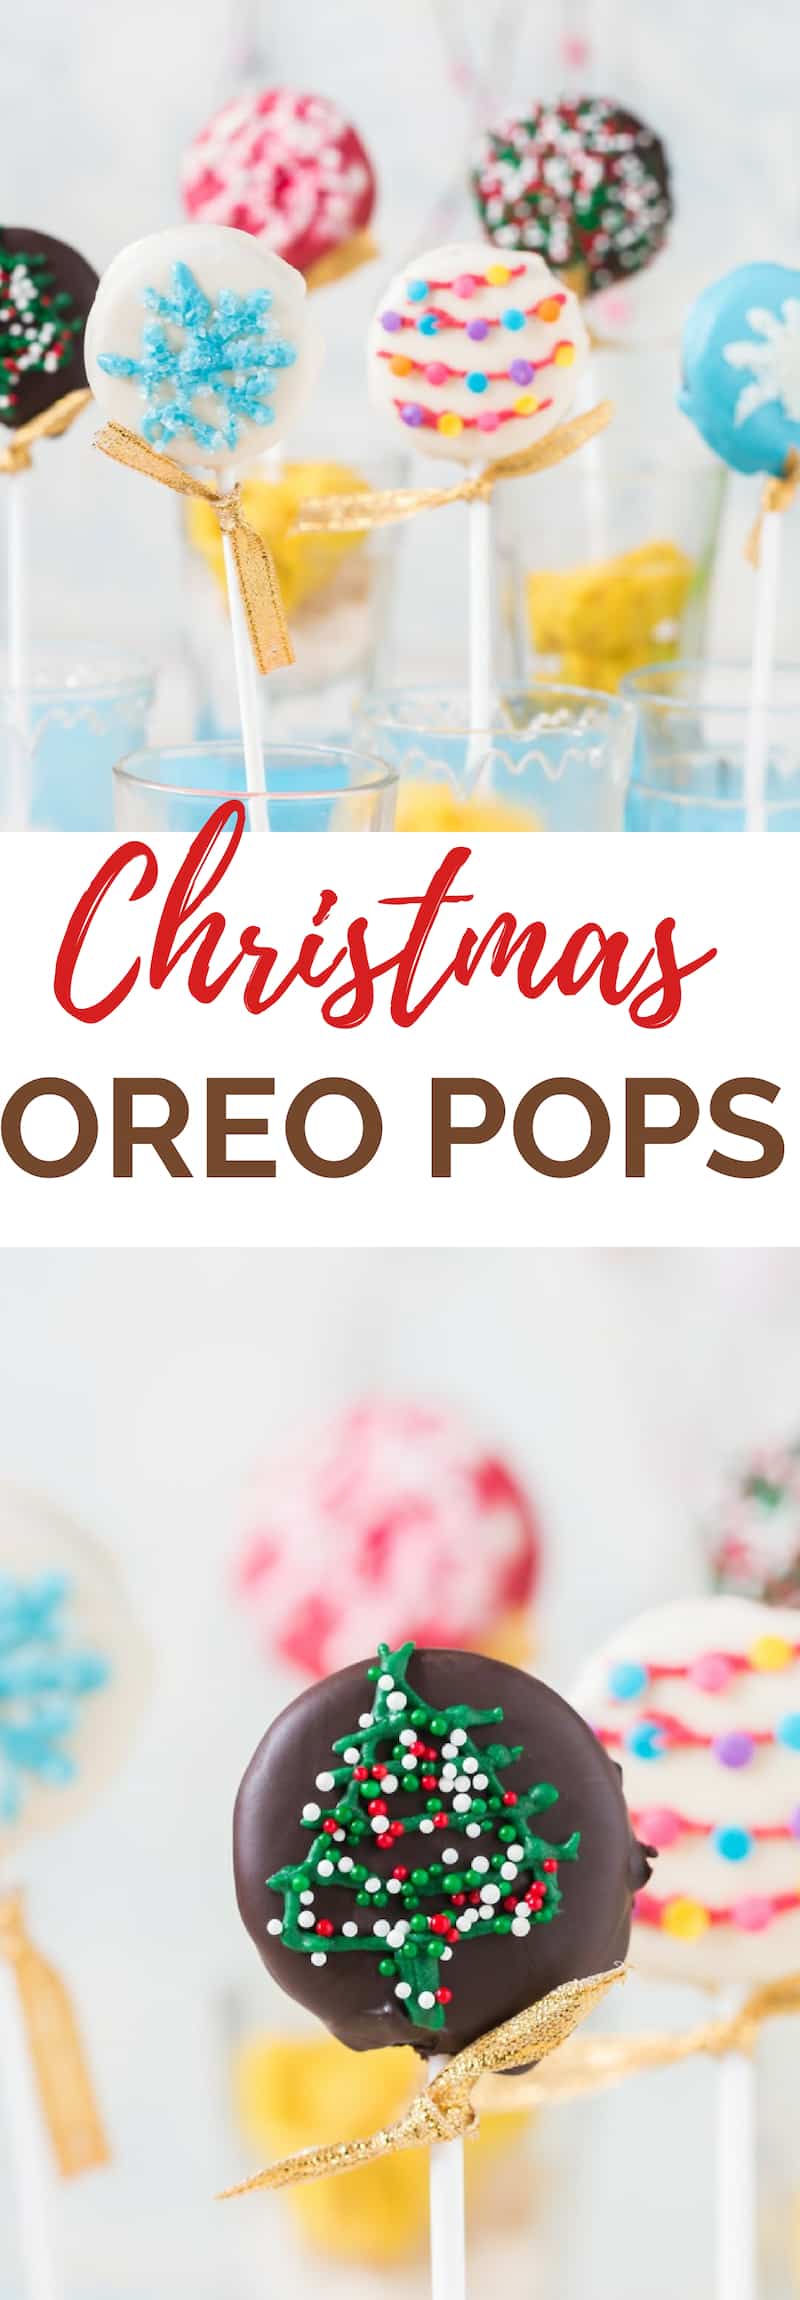 Christmas OREO pops with text overlay